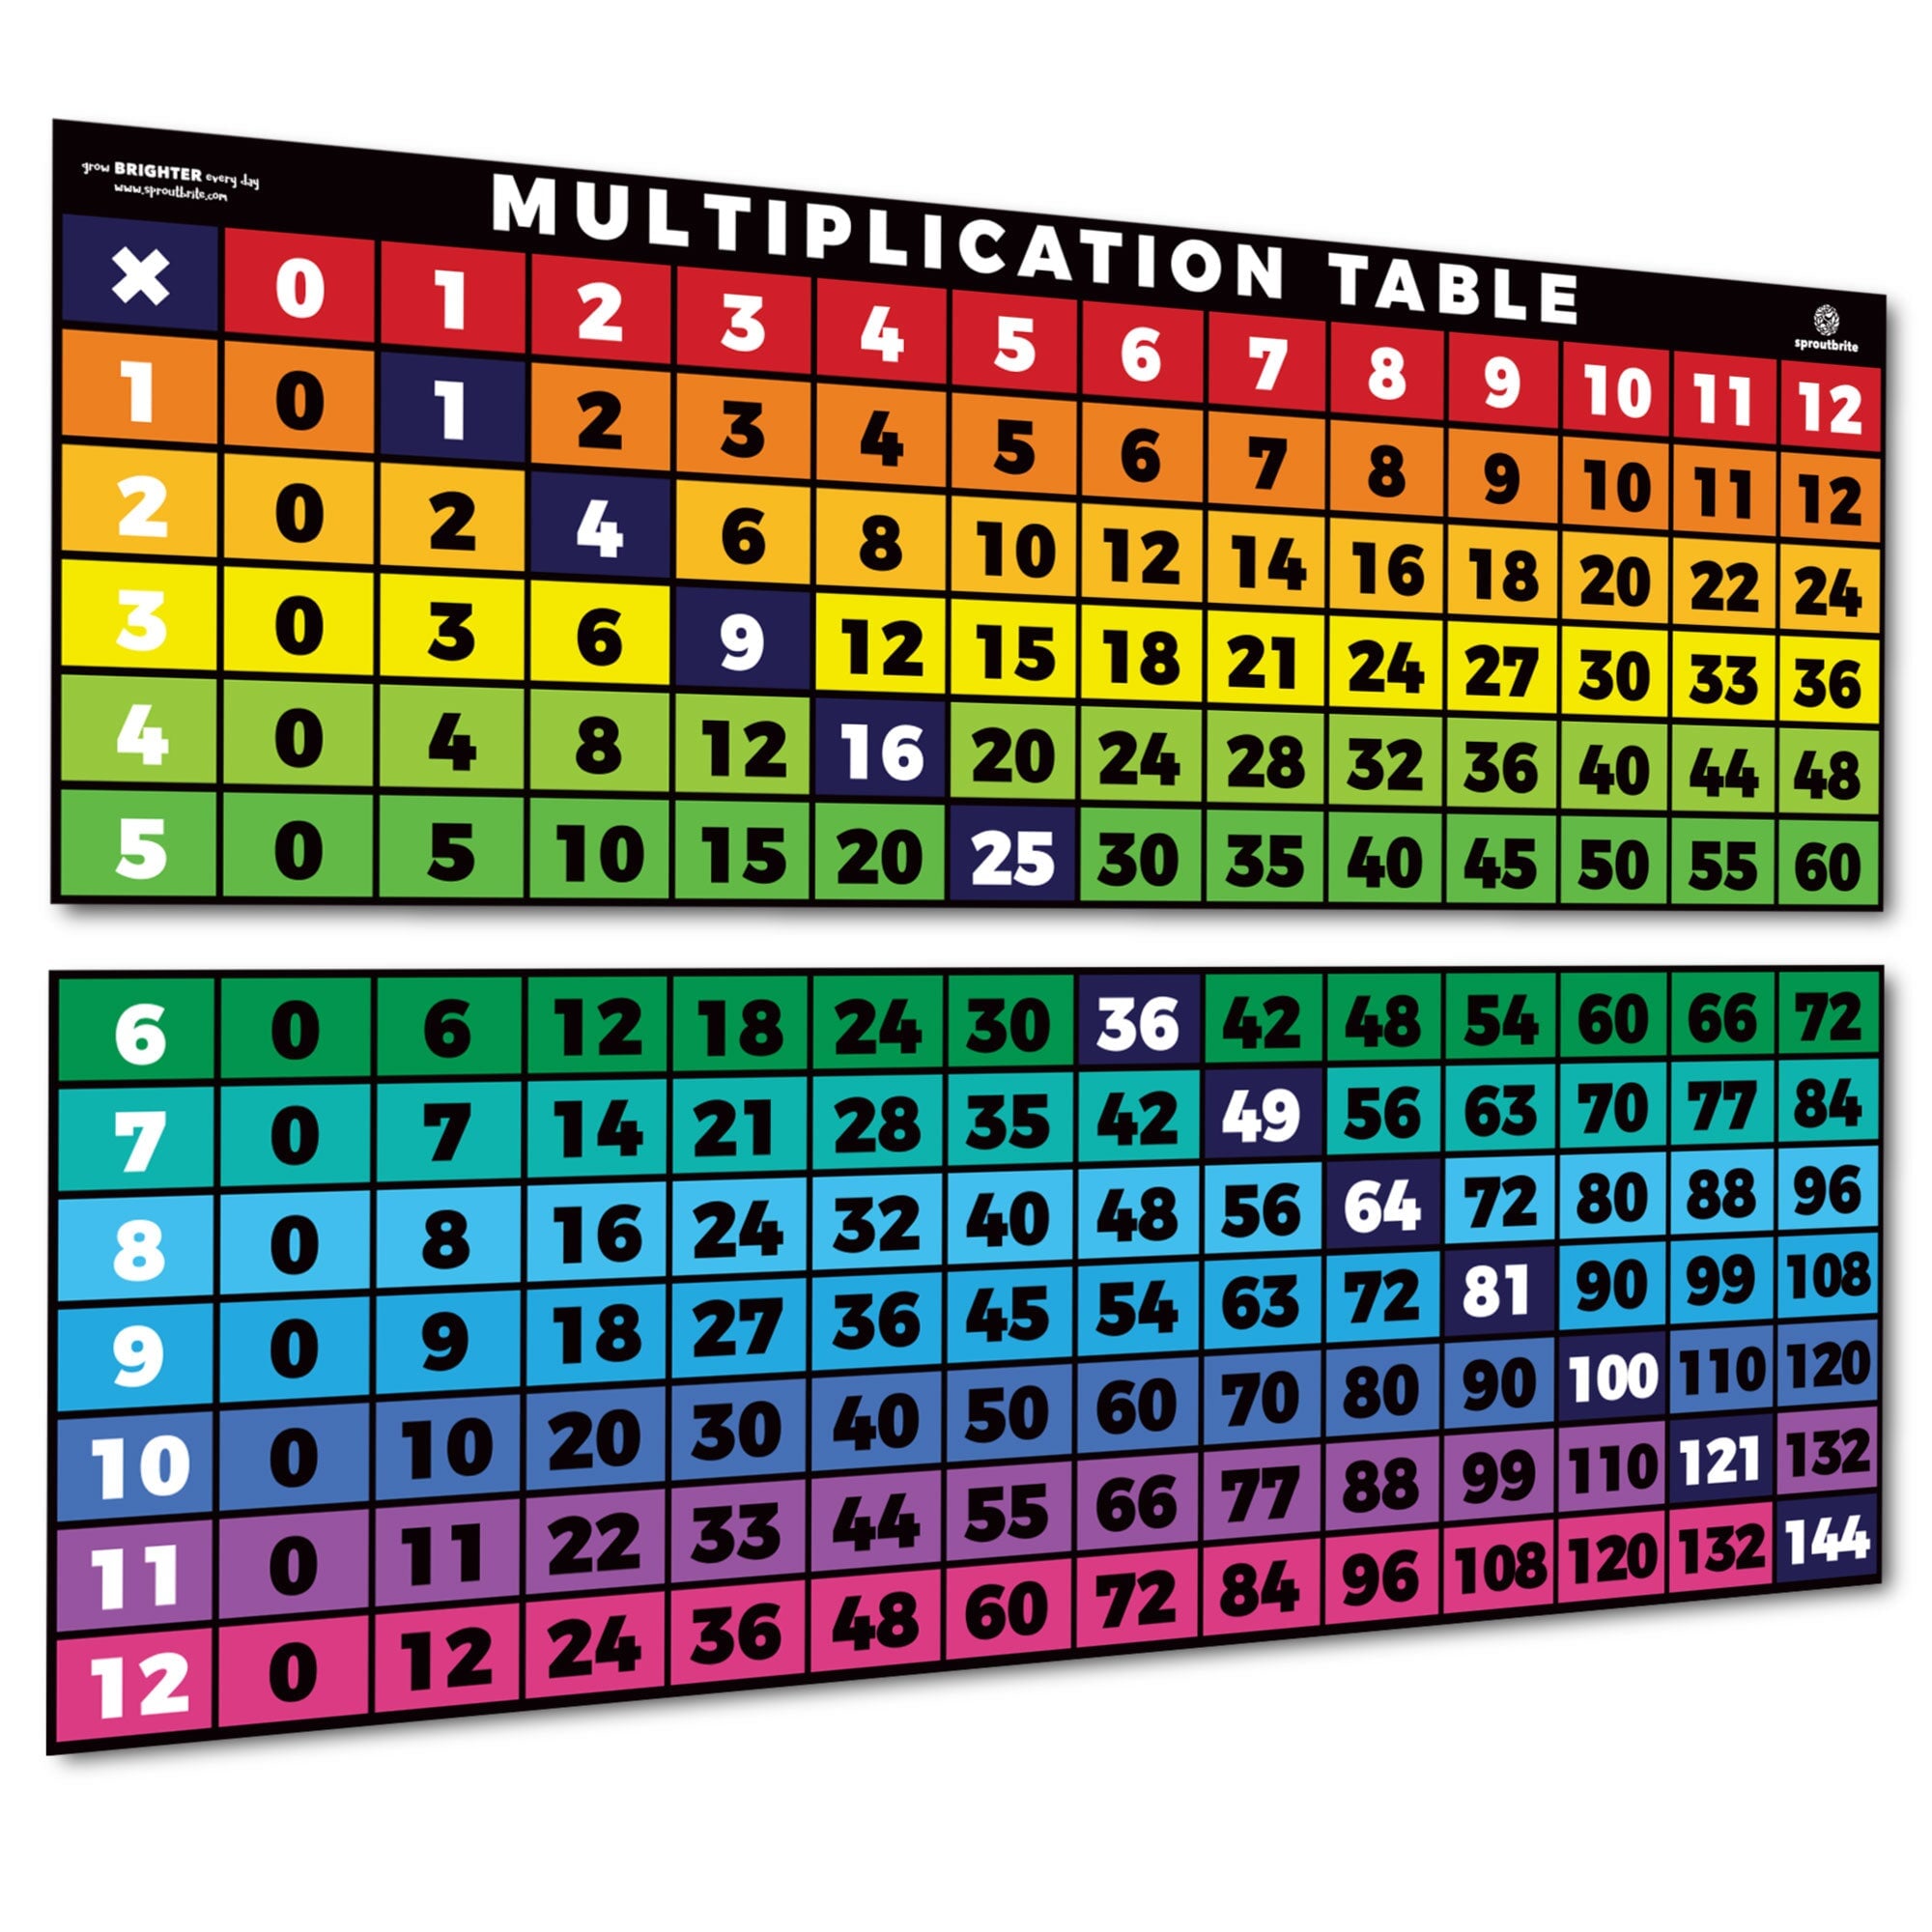 times table chart up to 20